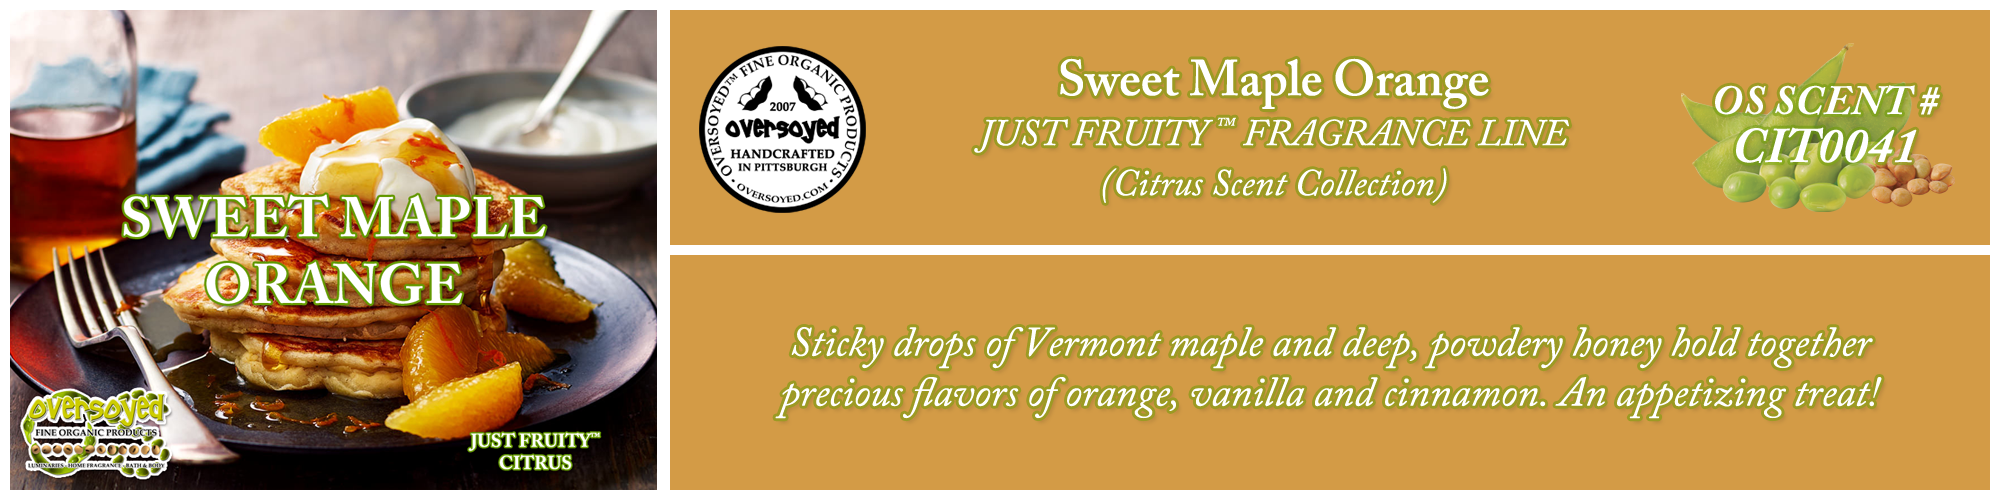 Sweet Maple Orange Handcrafted Products Collection